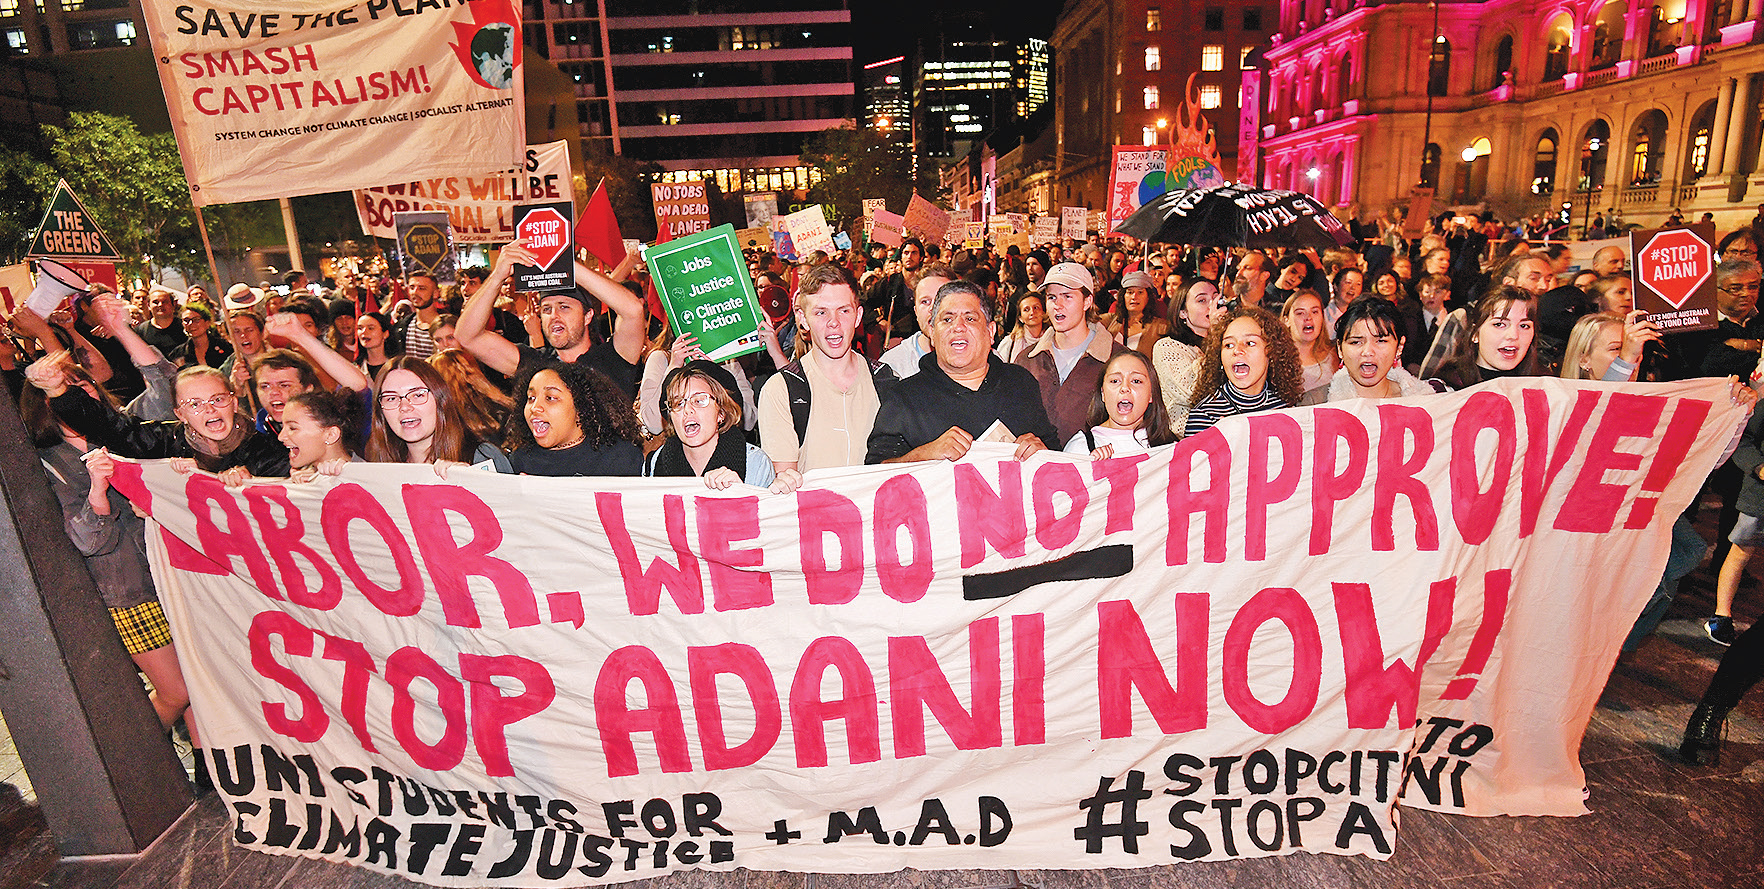 Several people have been arrested and released without charge after gluing themselves to a Brisbane road during a protest against the Queensland Government’s approval of the Adani coal mine.